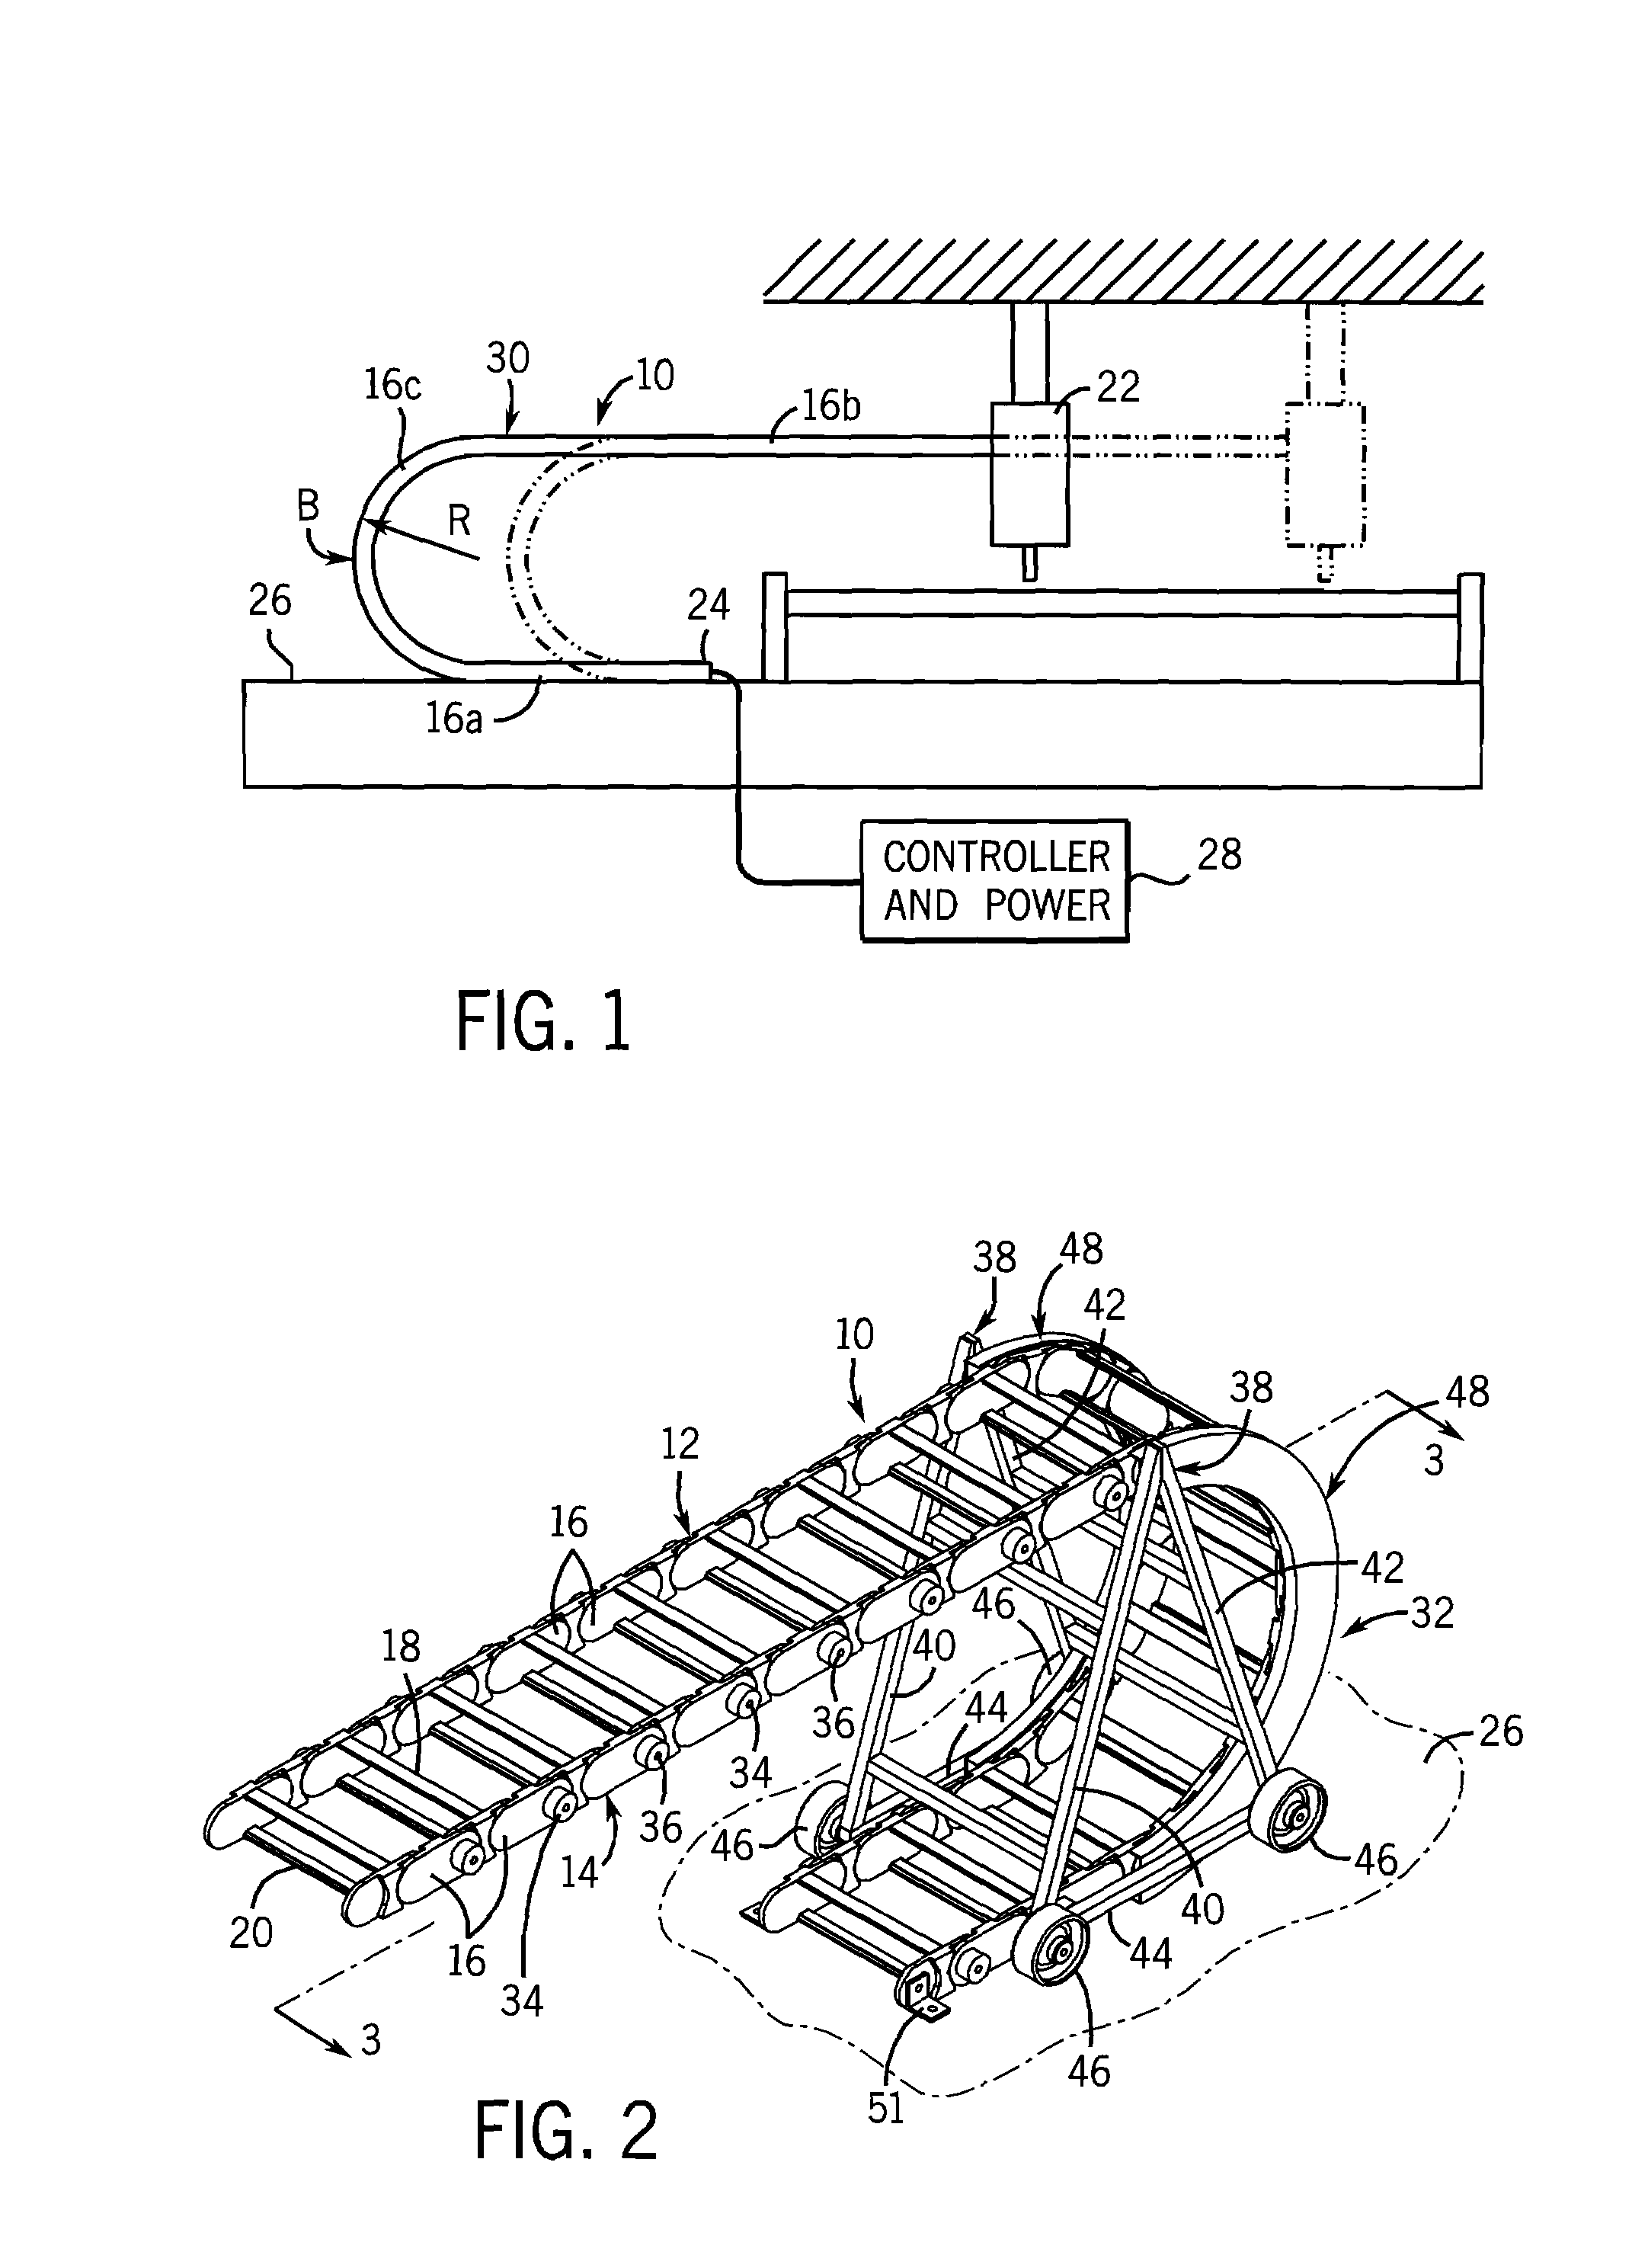 Cable and hose carrier support system